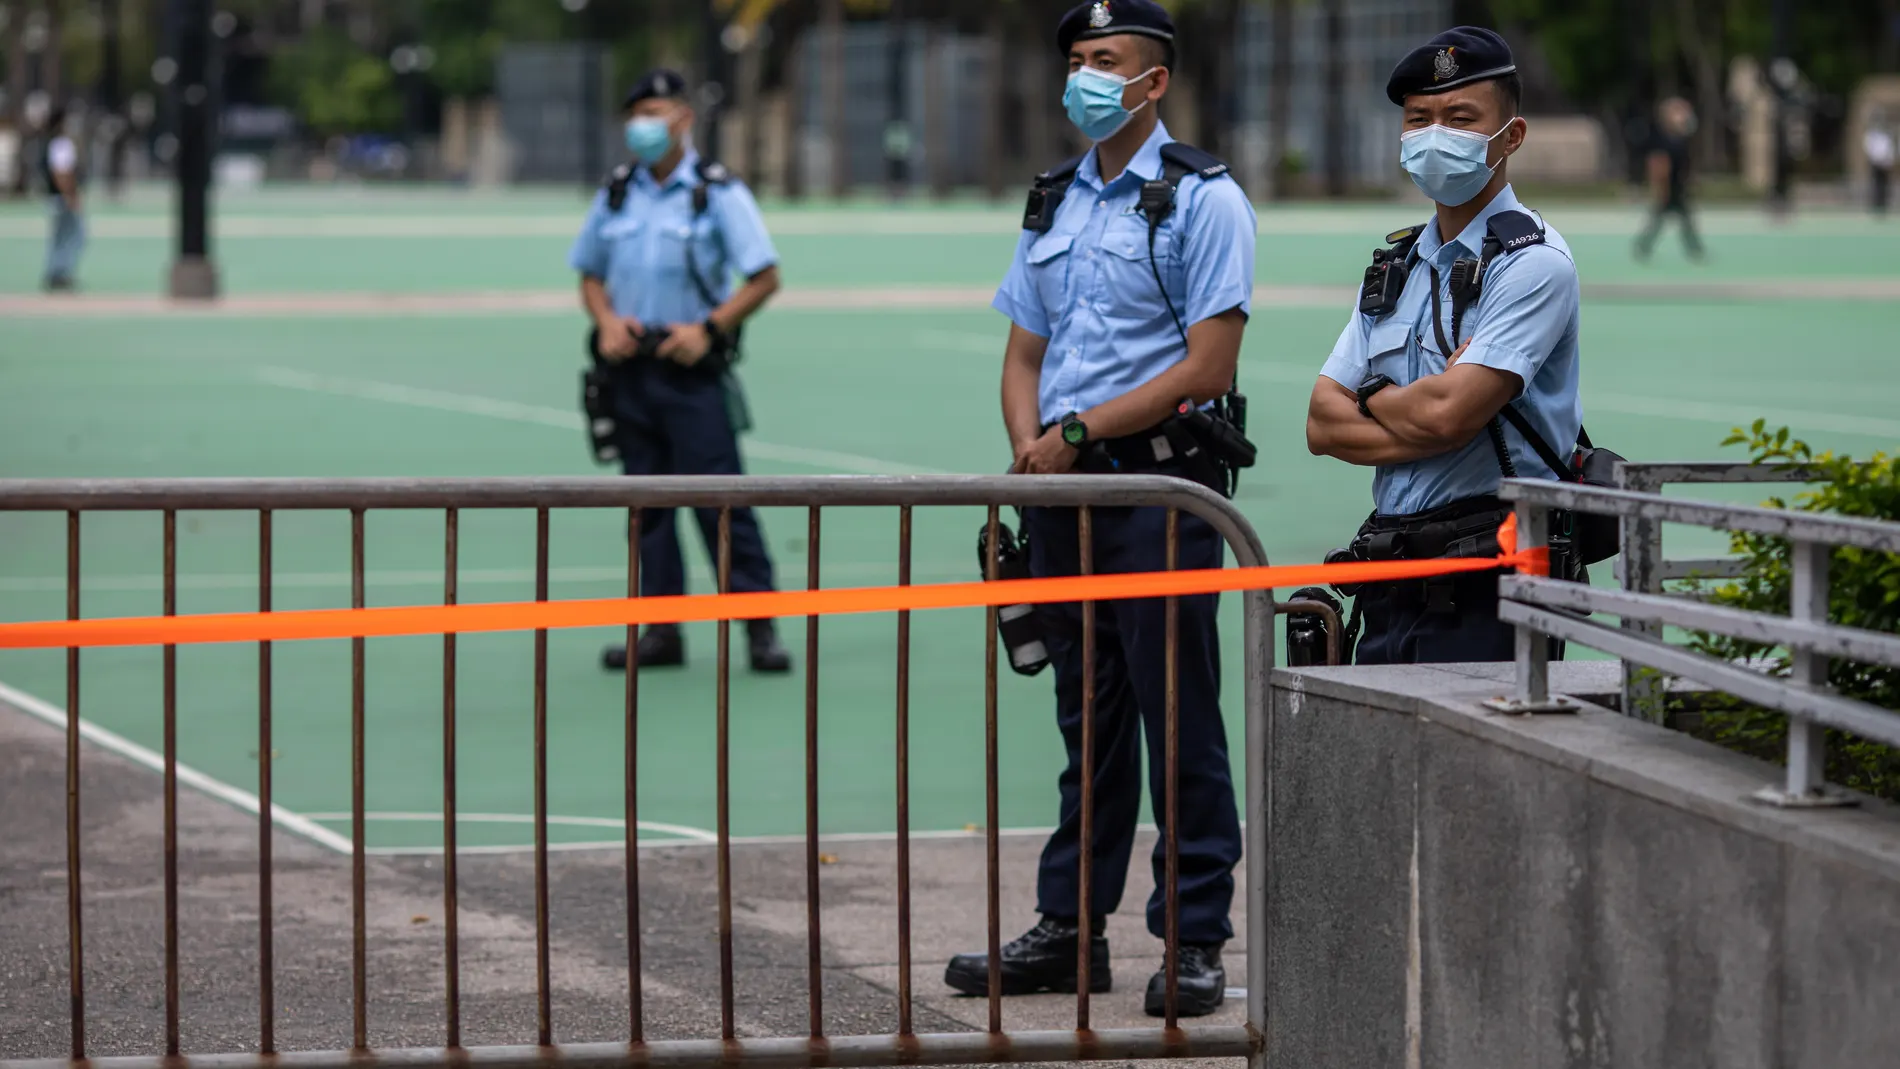 Hong Kong (China), 04/06/2021.- Police stand guard in a sealed-off Victoria Park in Hong Kong, China, 04 June 2021. Police sealed-off most parts of the park, saying they had seen online appeals for people to gather there despite a ban to commemorate in public the 1989 Tiananmen Square crackdown that took place in Beijing. It is the second year in a row police banned the annual candlelight vigil in Victoria Park citing ongoing public health threat posed by the COVID-19 pandemic. EFE/EPA/JEROME FAVRE